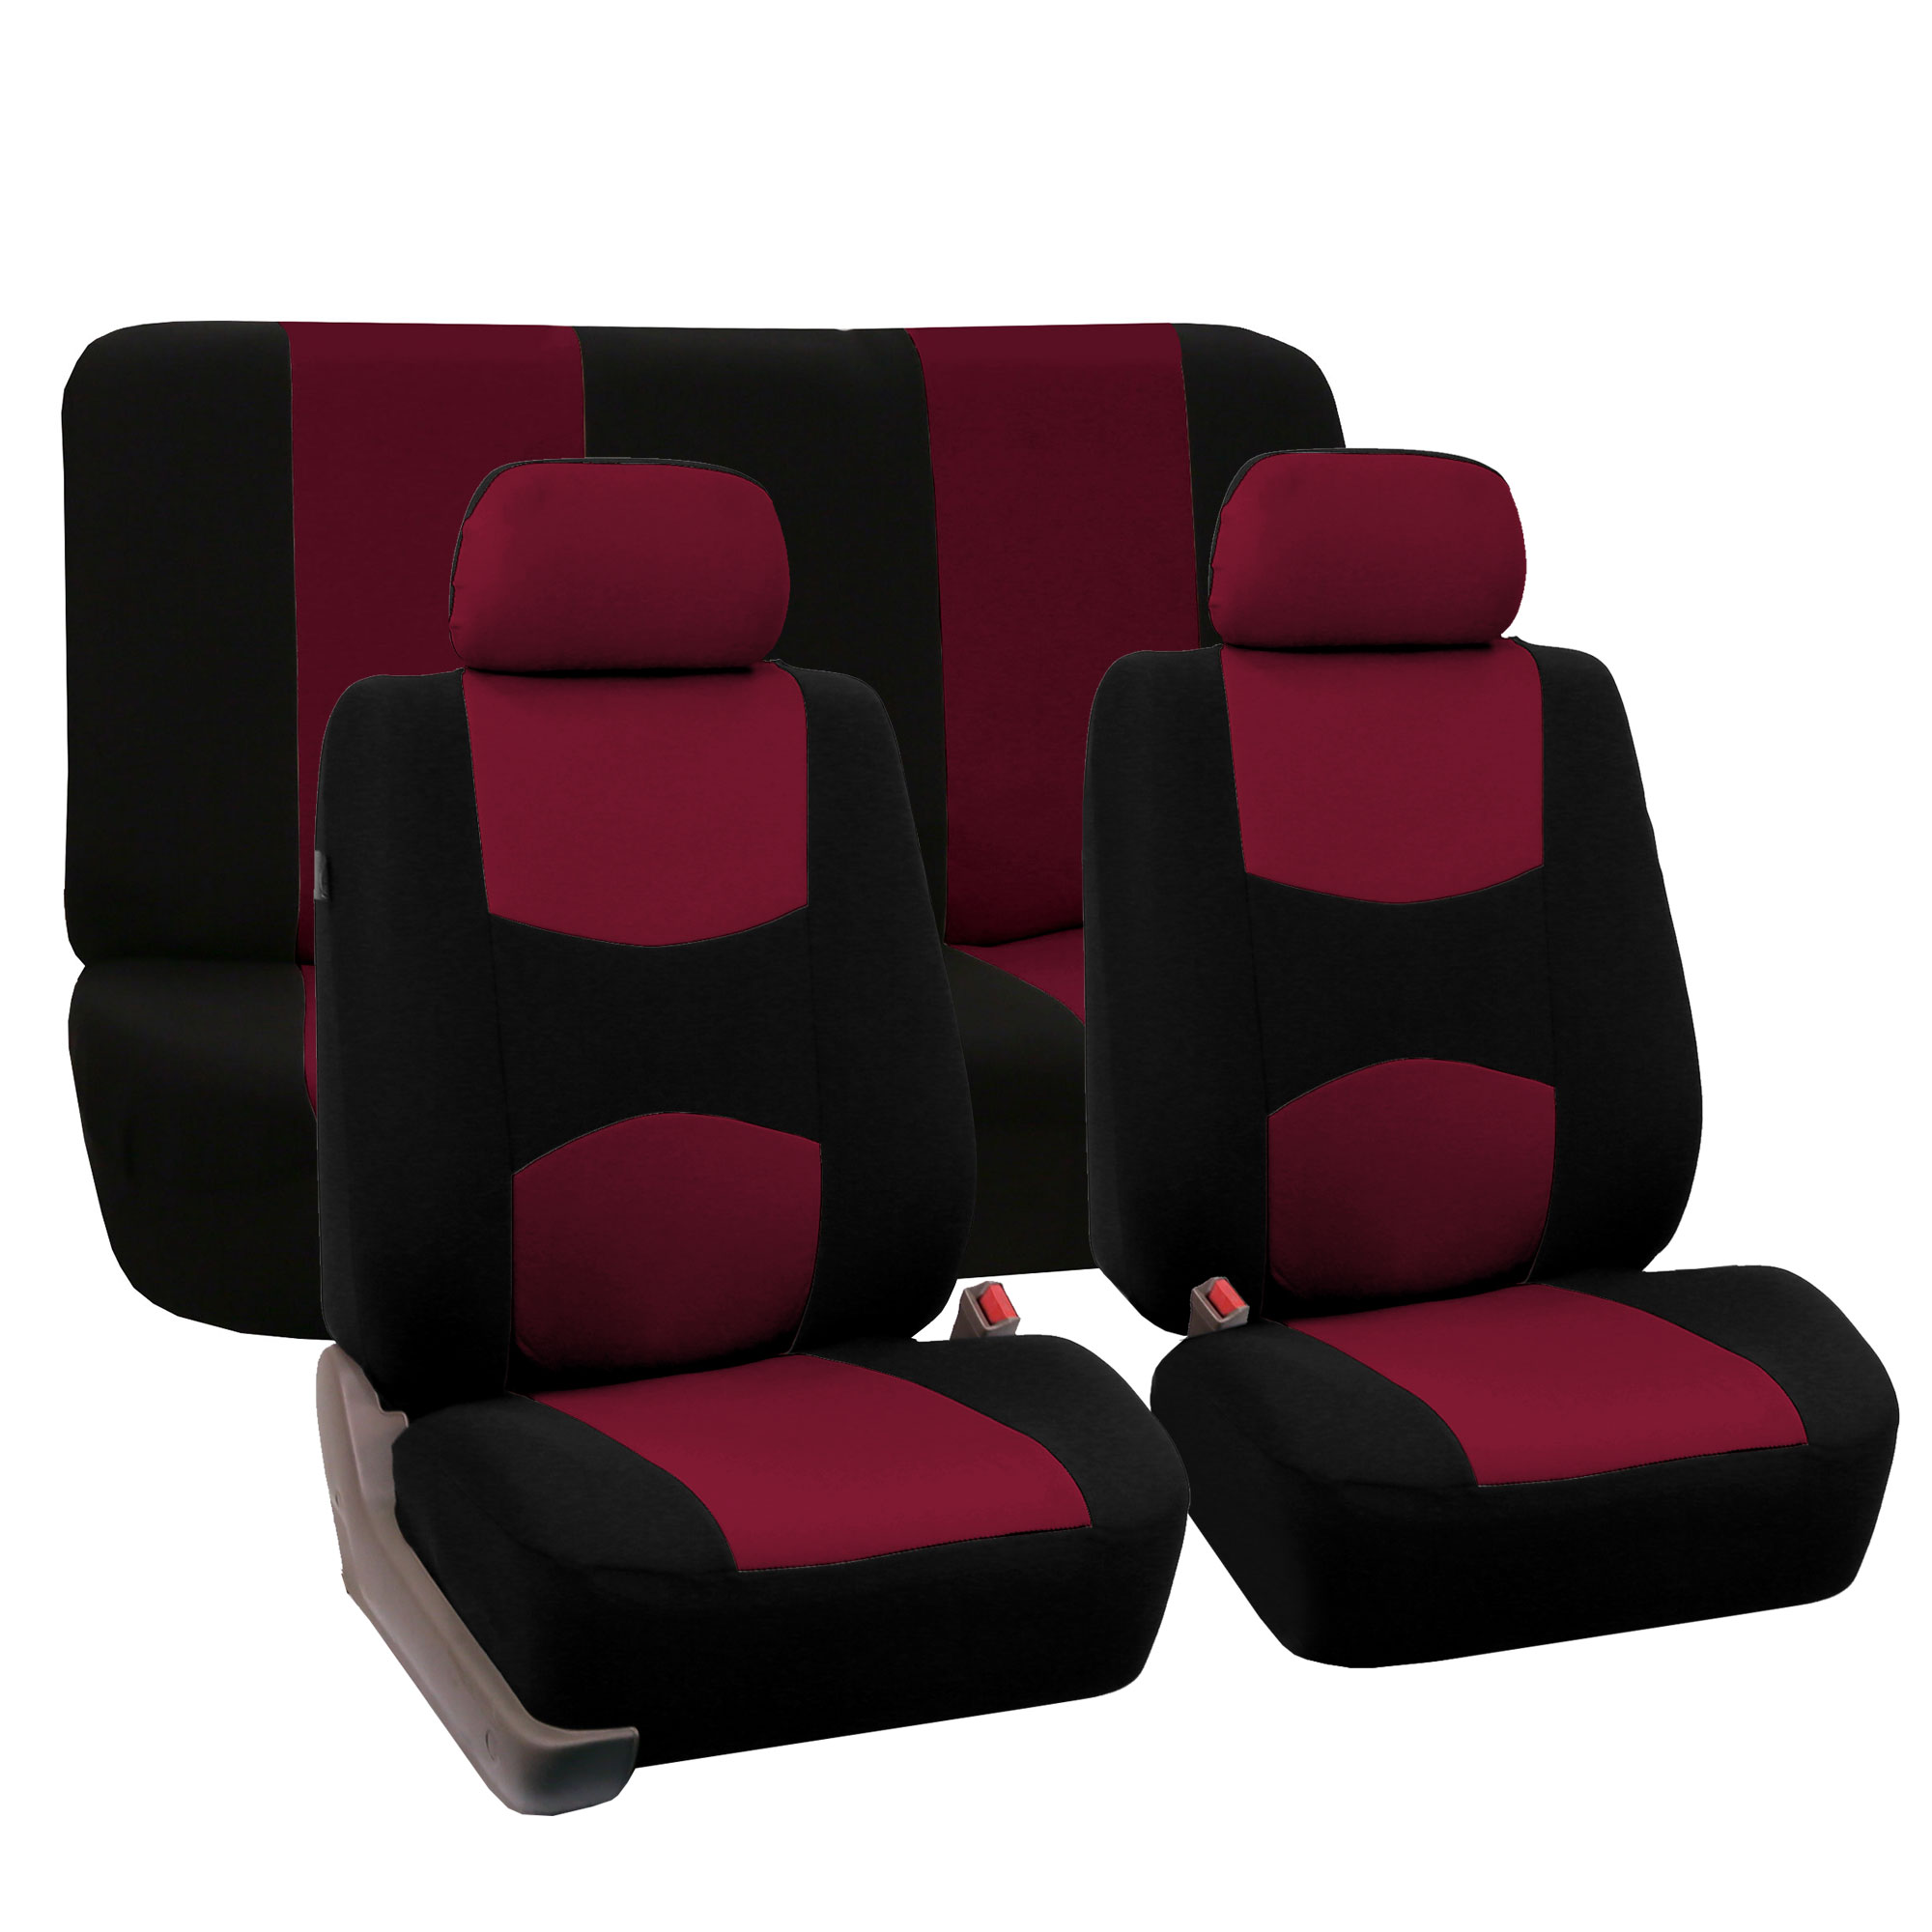 FH Group Universal Flat Cloth Fabric 2 Headrests Full Set Car Seat Cover, Burgundy and Black - image 1 of 3